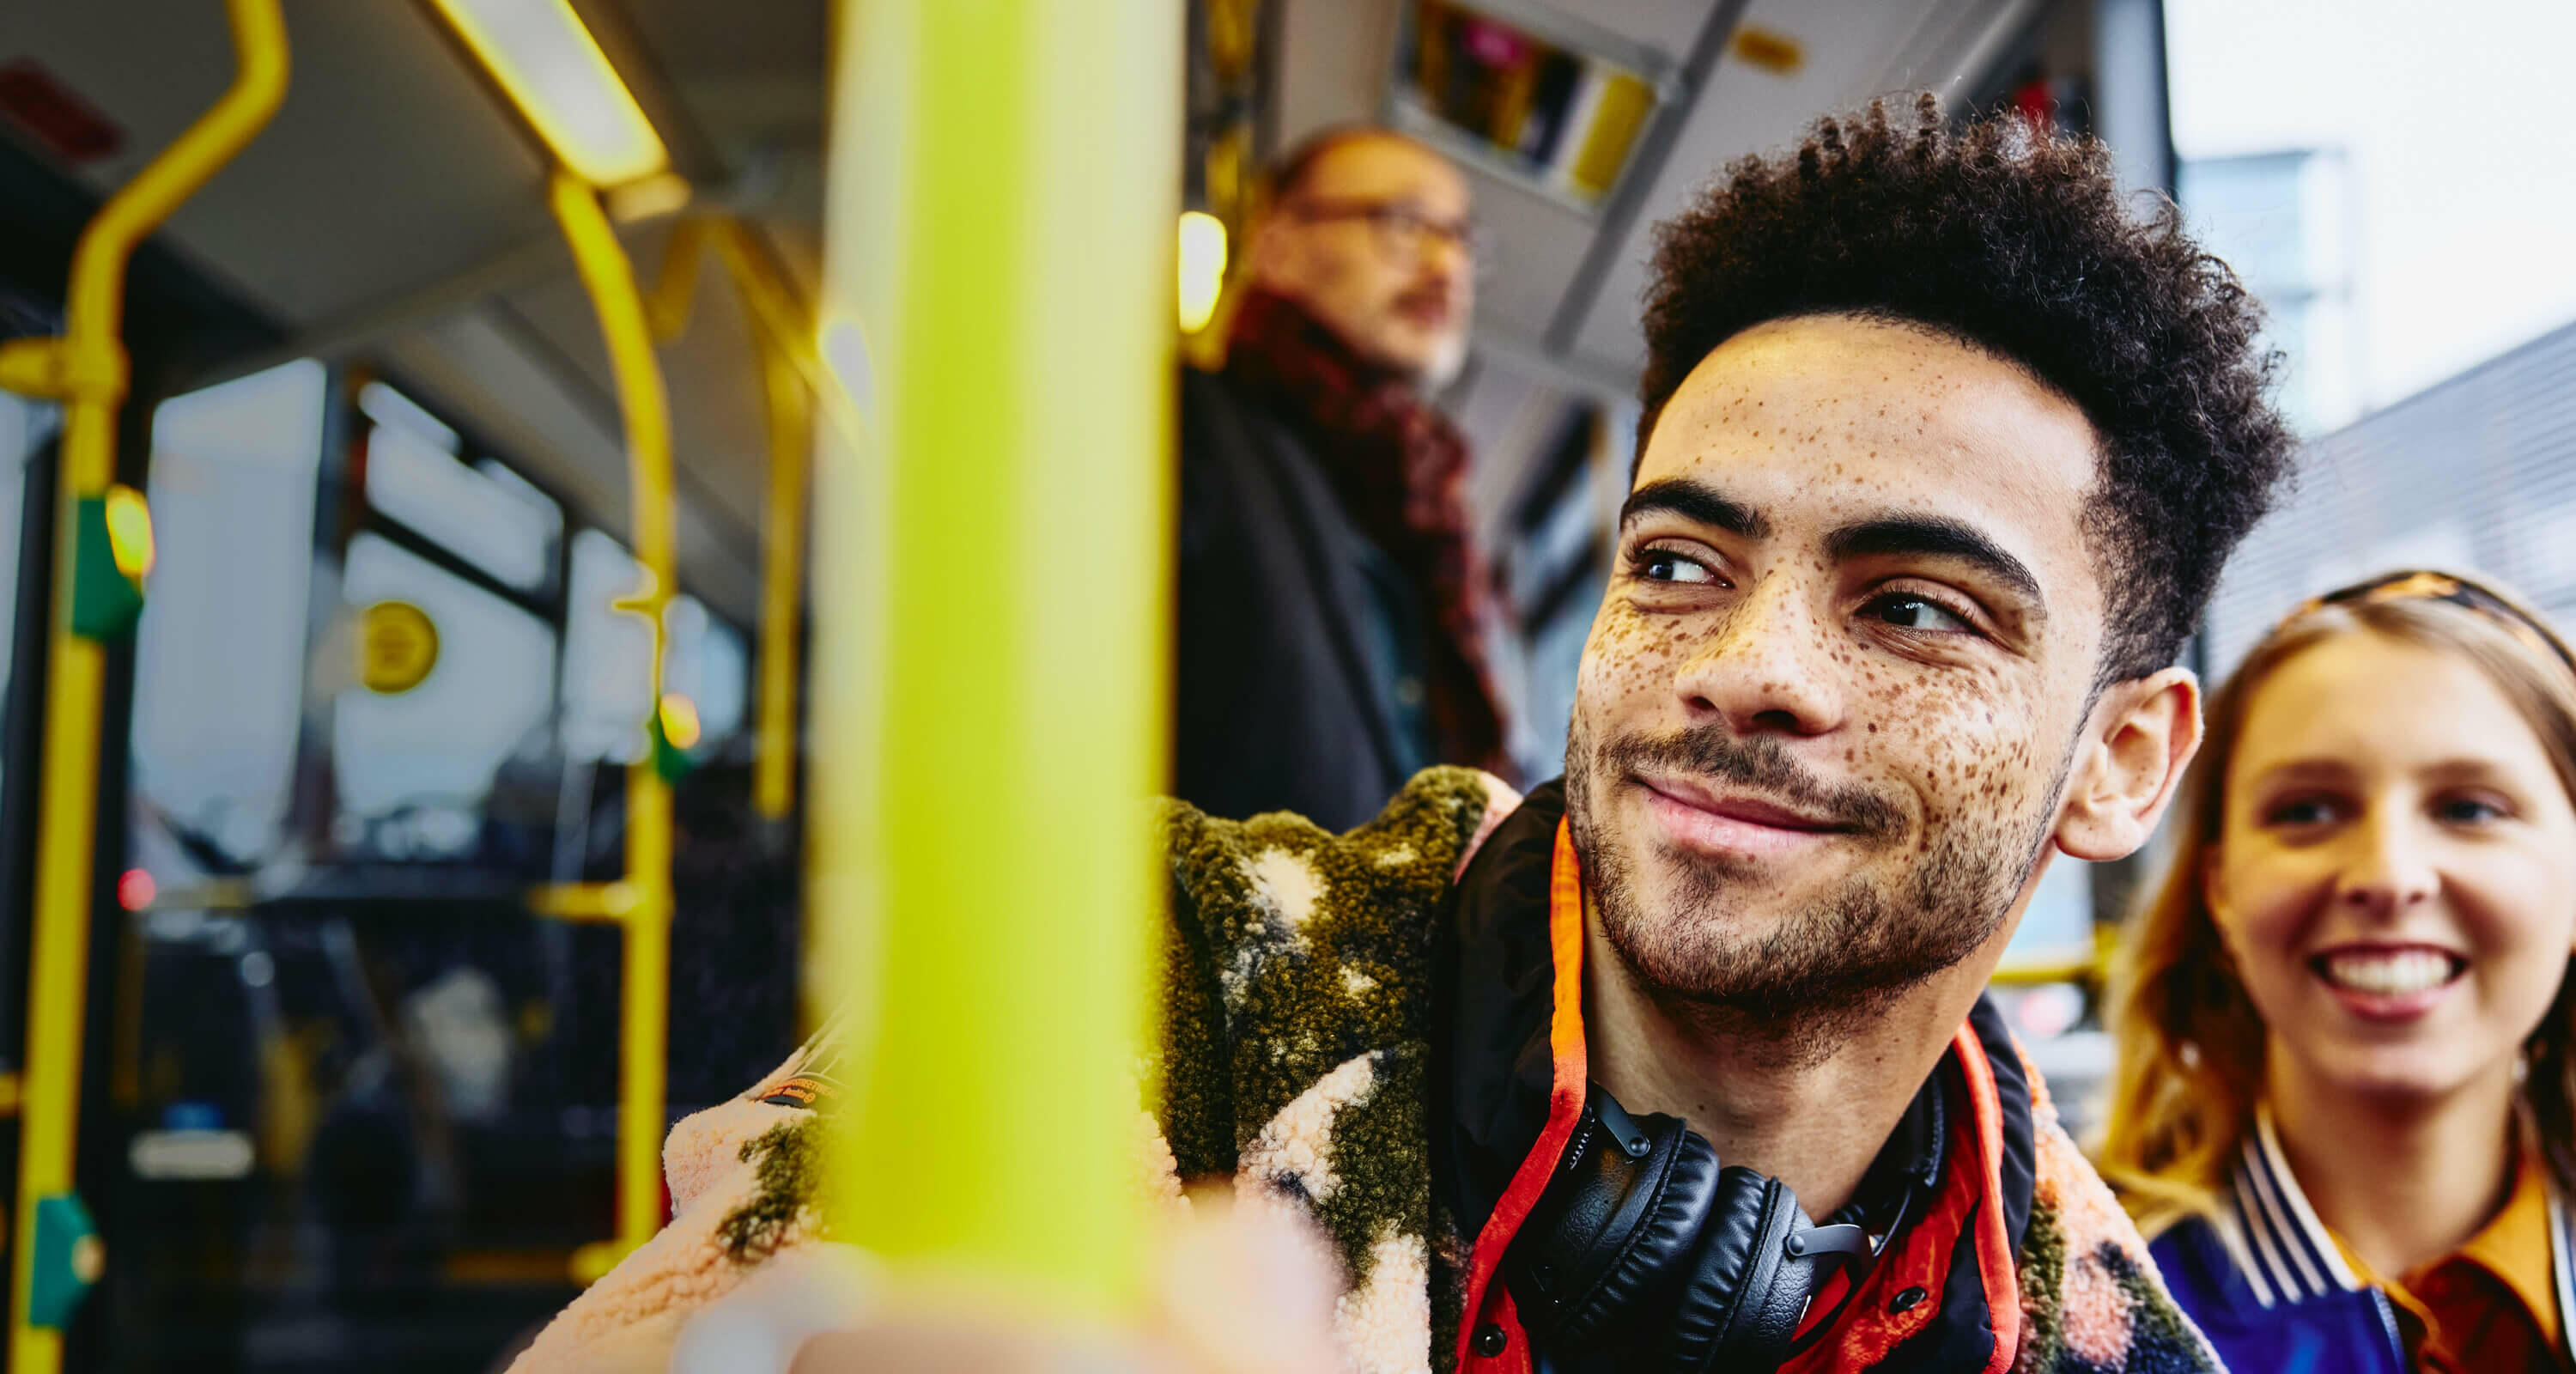 man and women in a bus, smiling